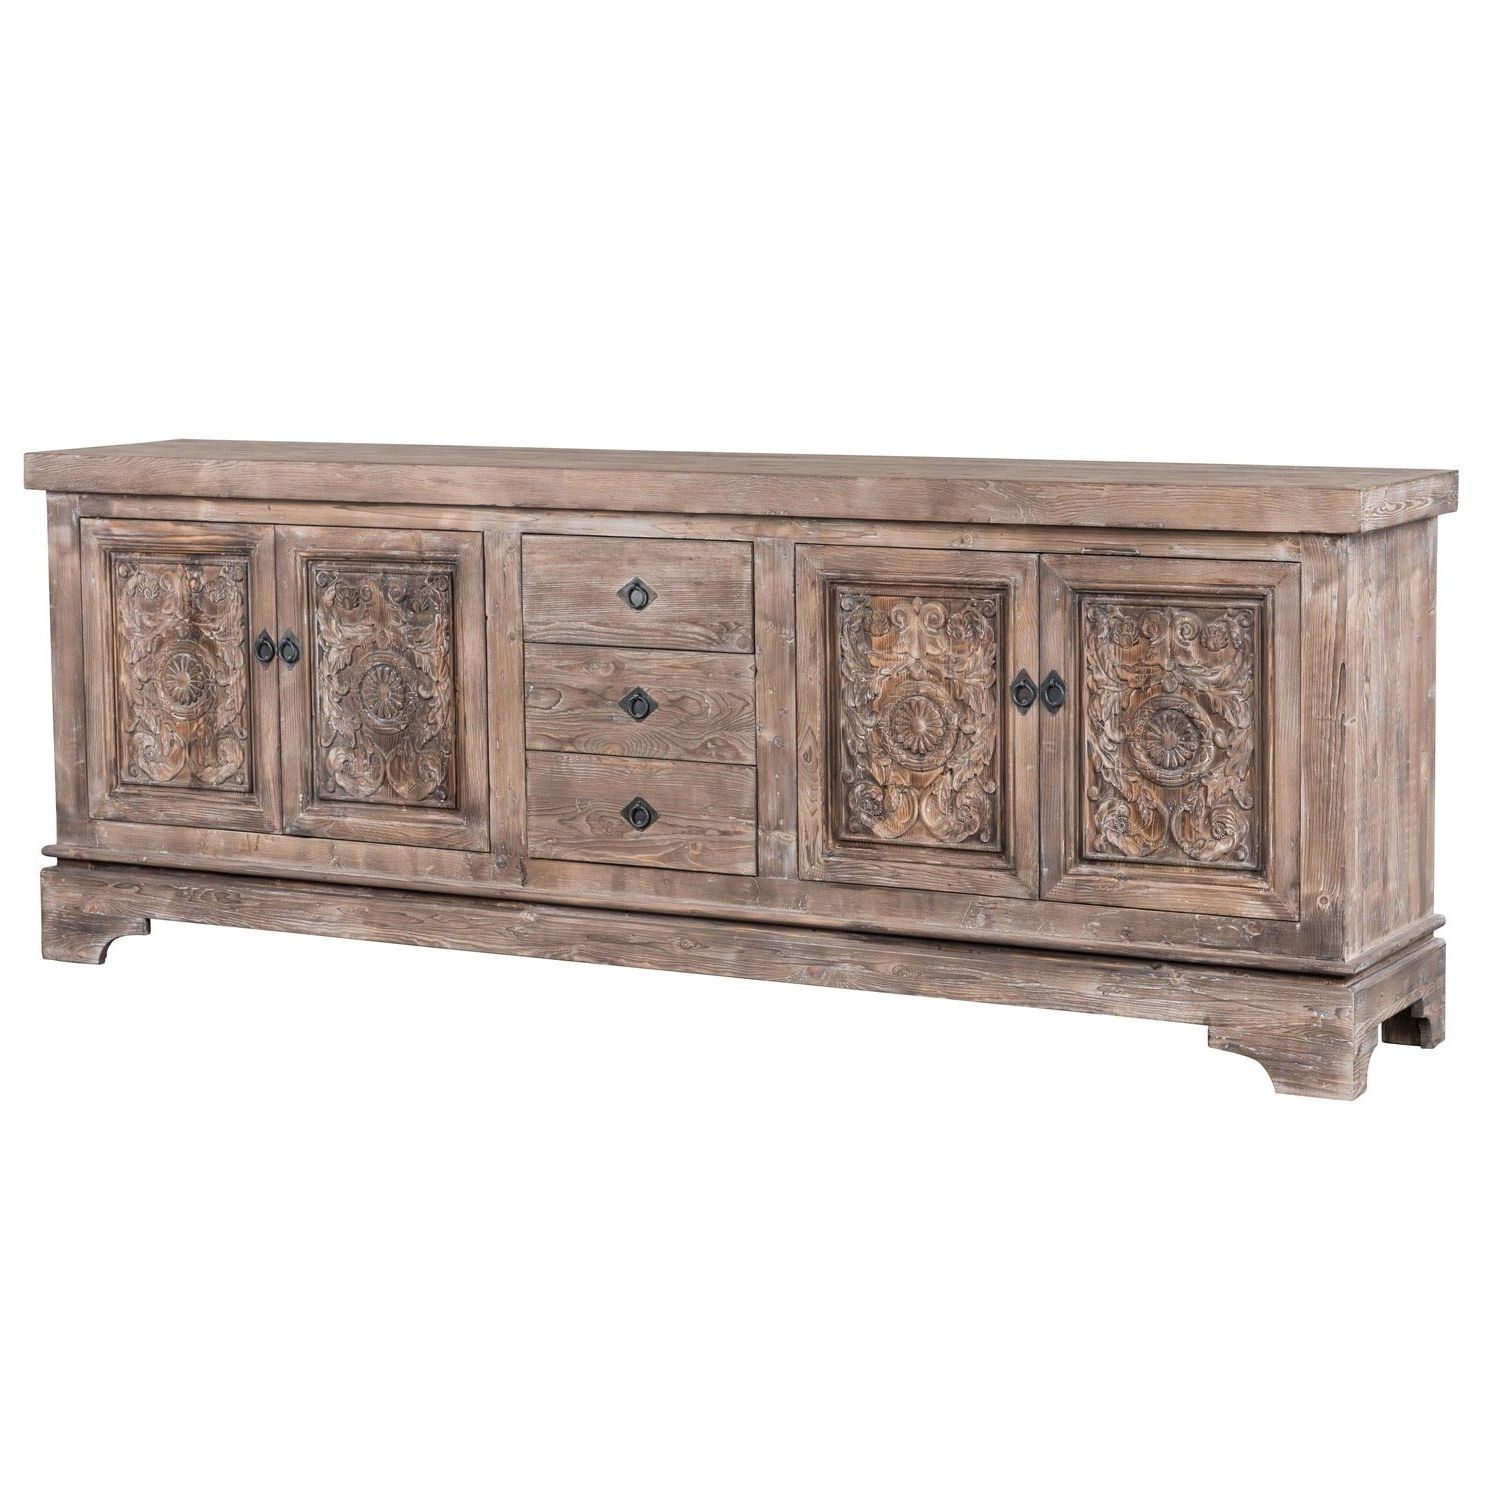 Most Popular Shop Allen Rustic Taupe Reclaimed Pine 106 Inch Sideboardkosas Throughout Iron Pine Sideboards (View 14 of 20)